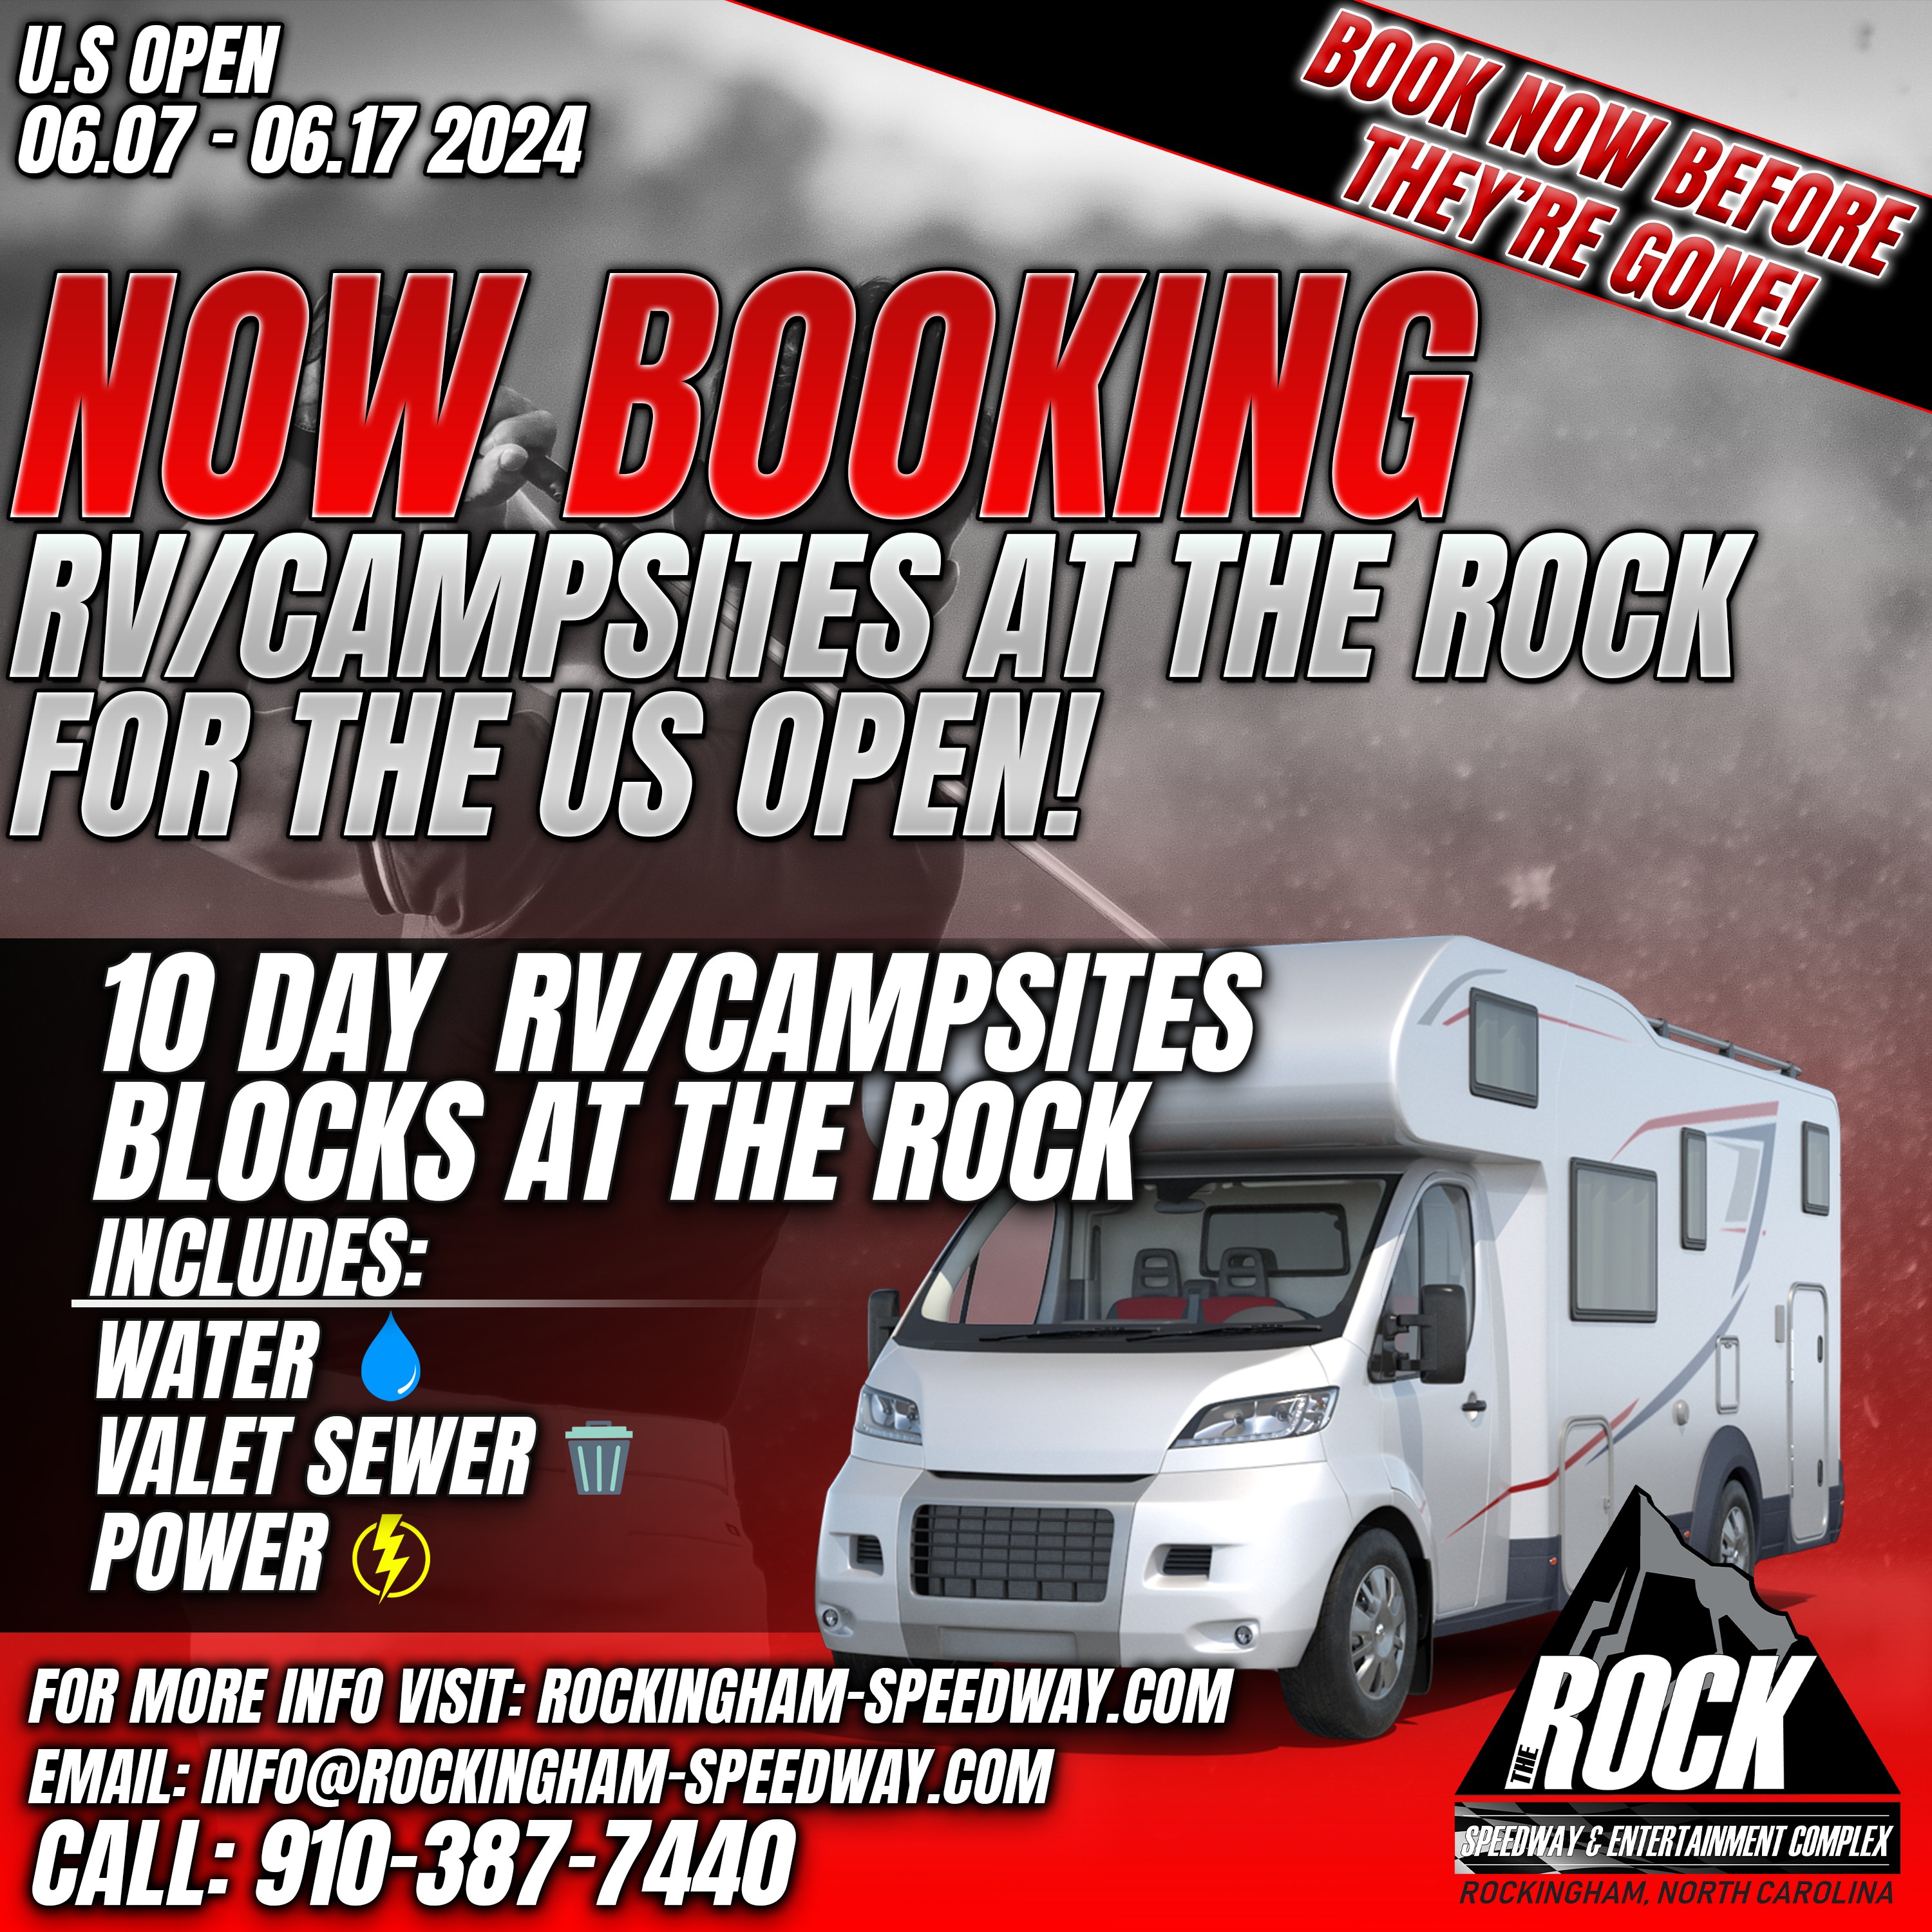 RV/Campsites at the rock for the US open!